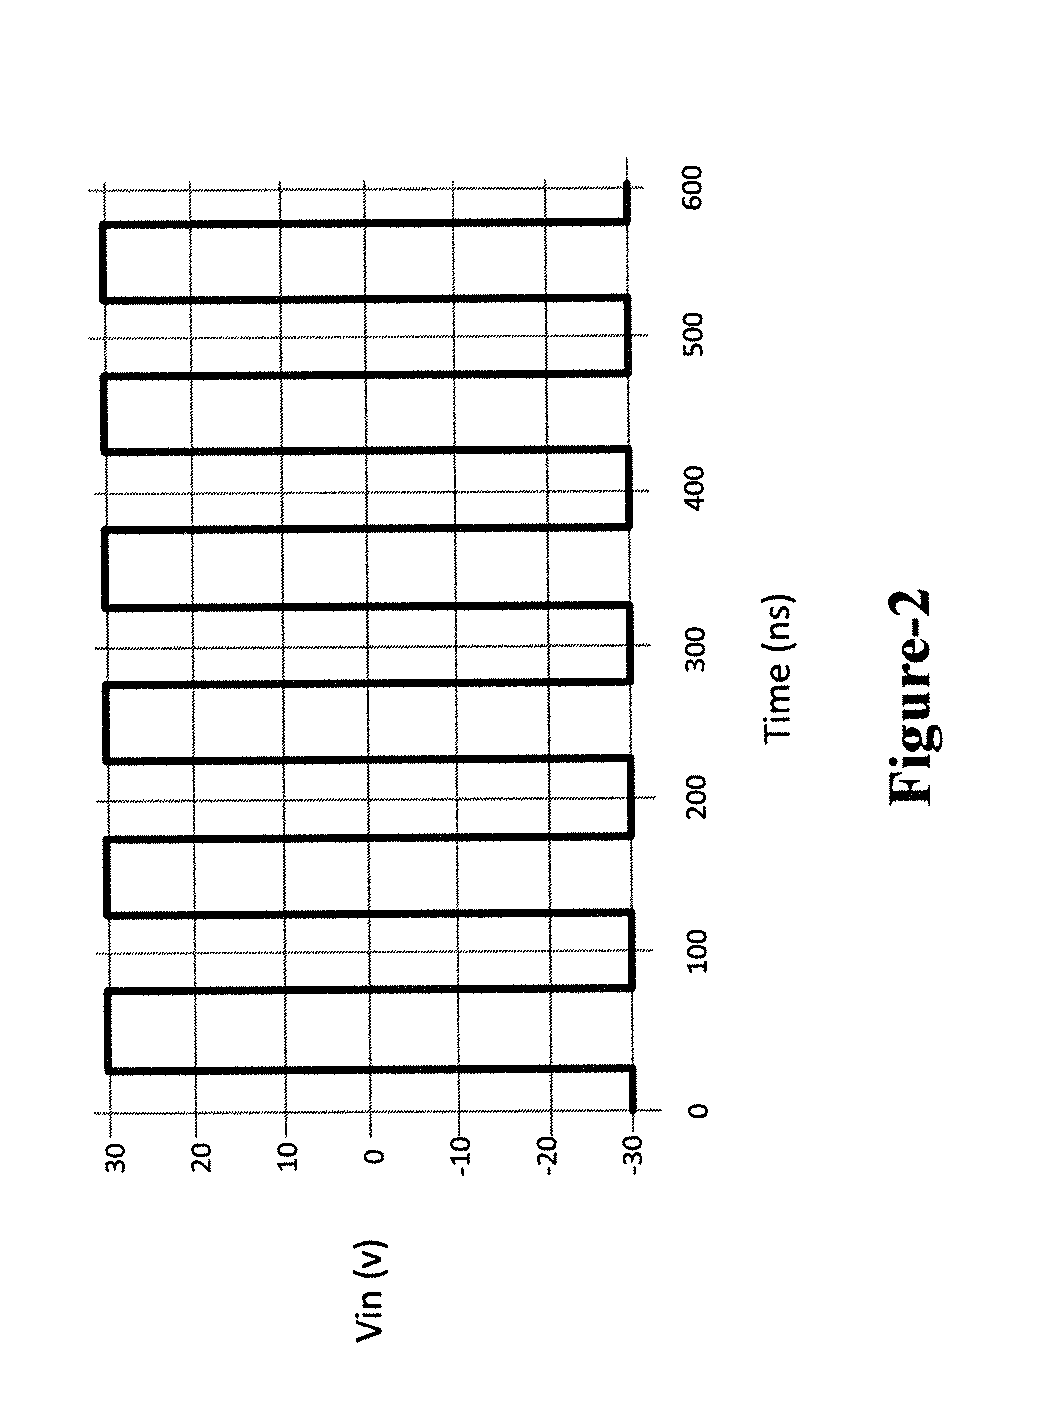 Switched mode negative inductor